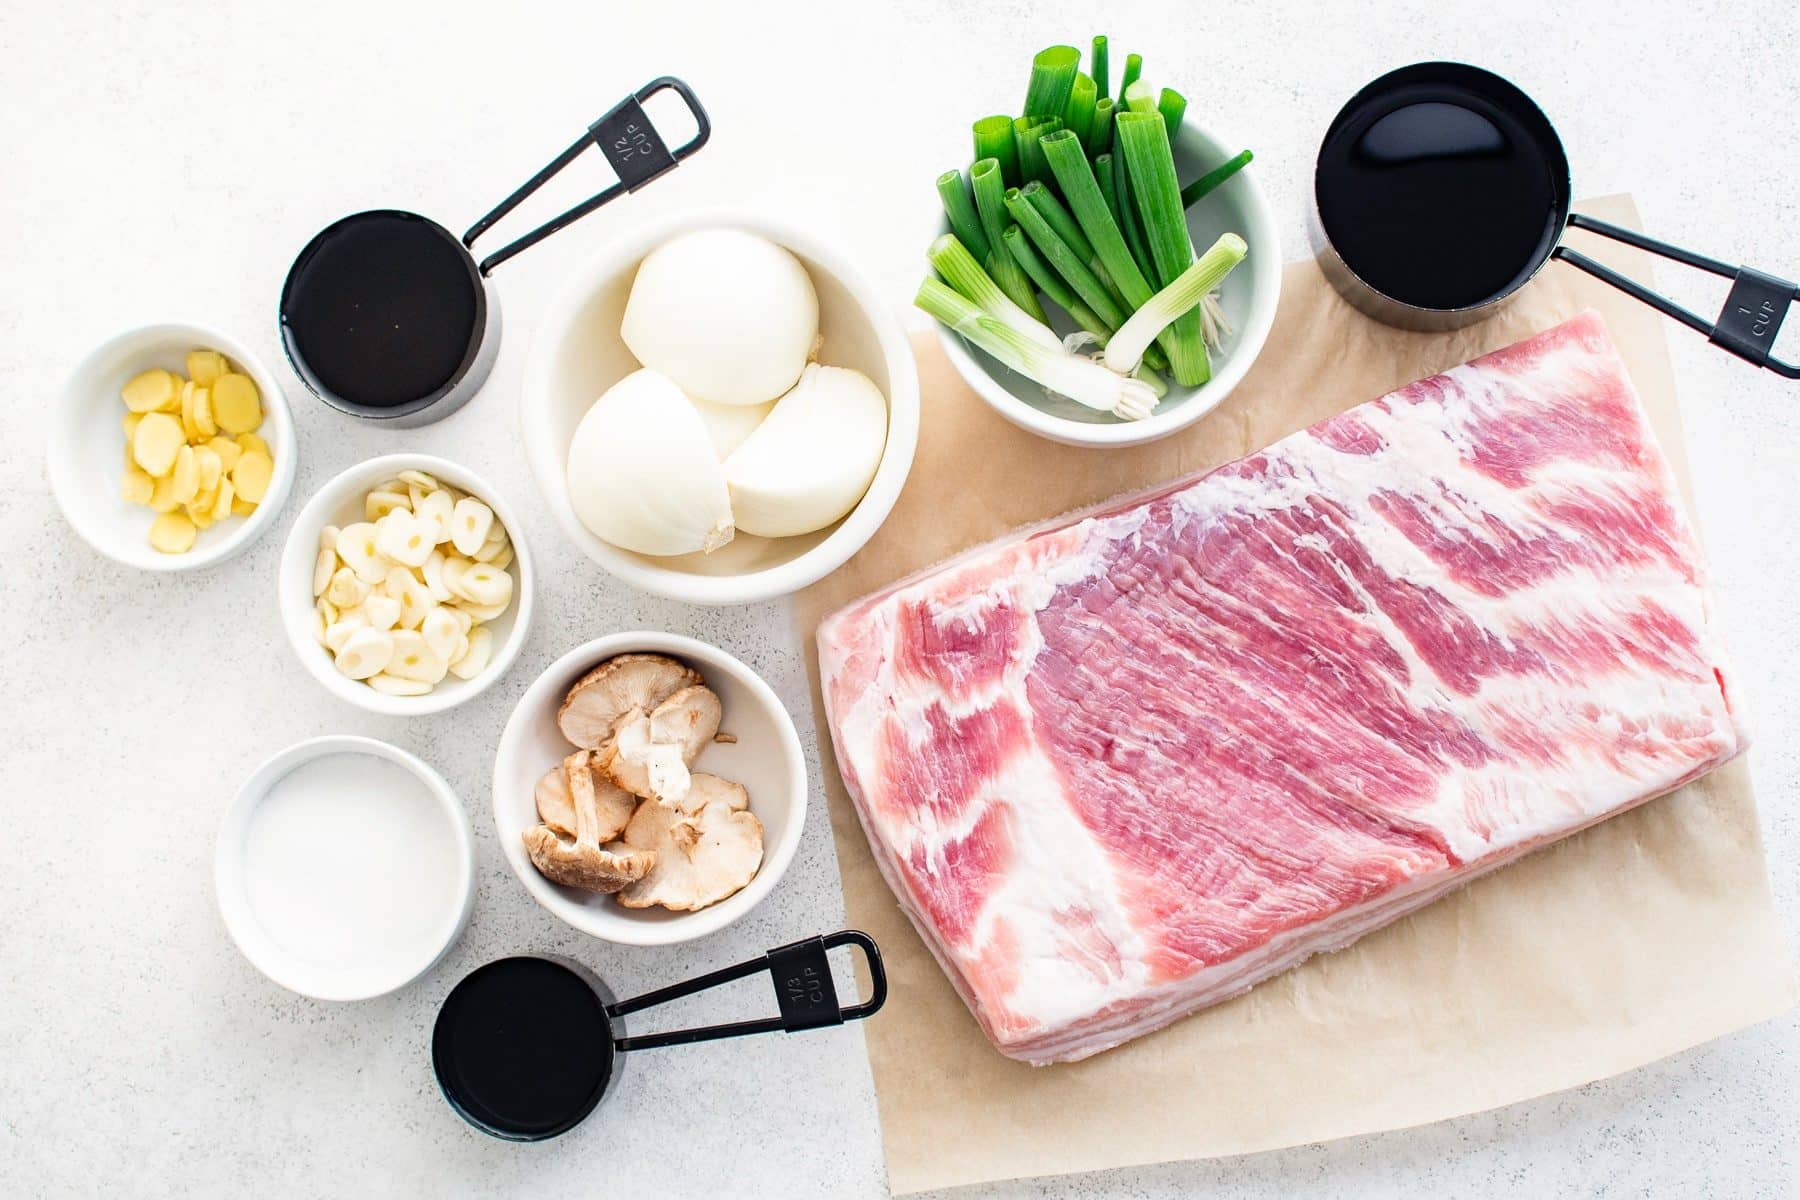 Ingredients needed to make Chashu pork displayed in separate bowls on a large table.